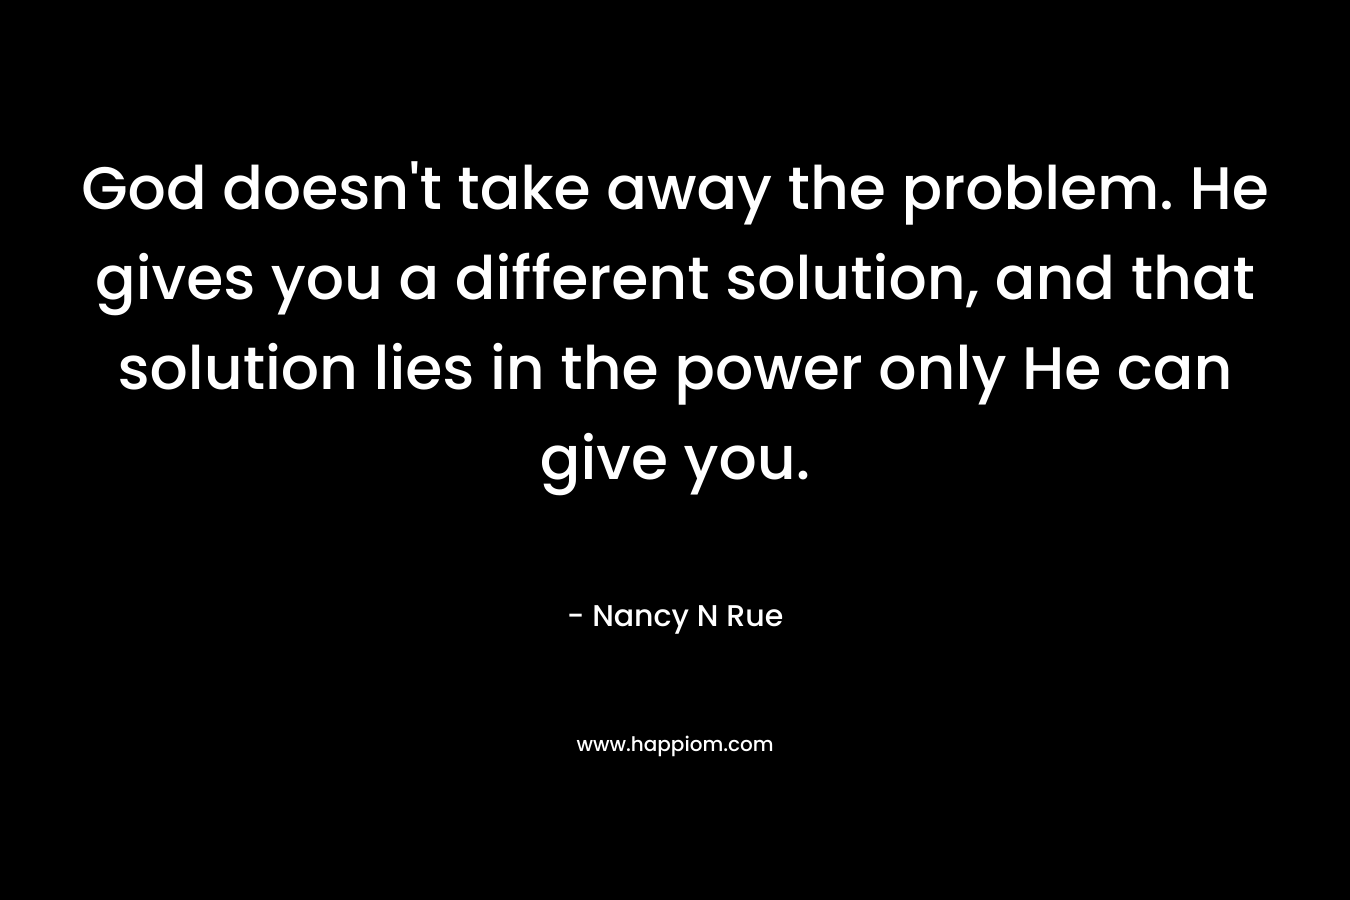 God doesn't take away the problem. He gives you a different solution, and that solution lies in the power only He can give you.